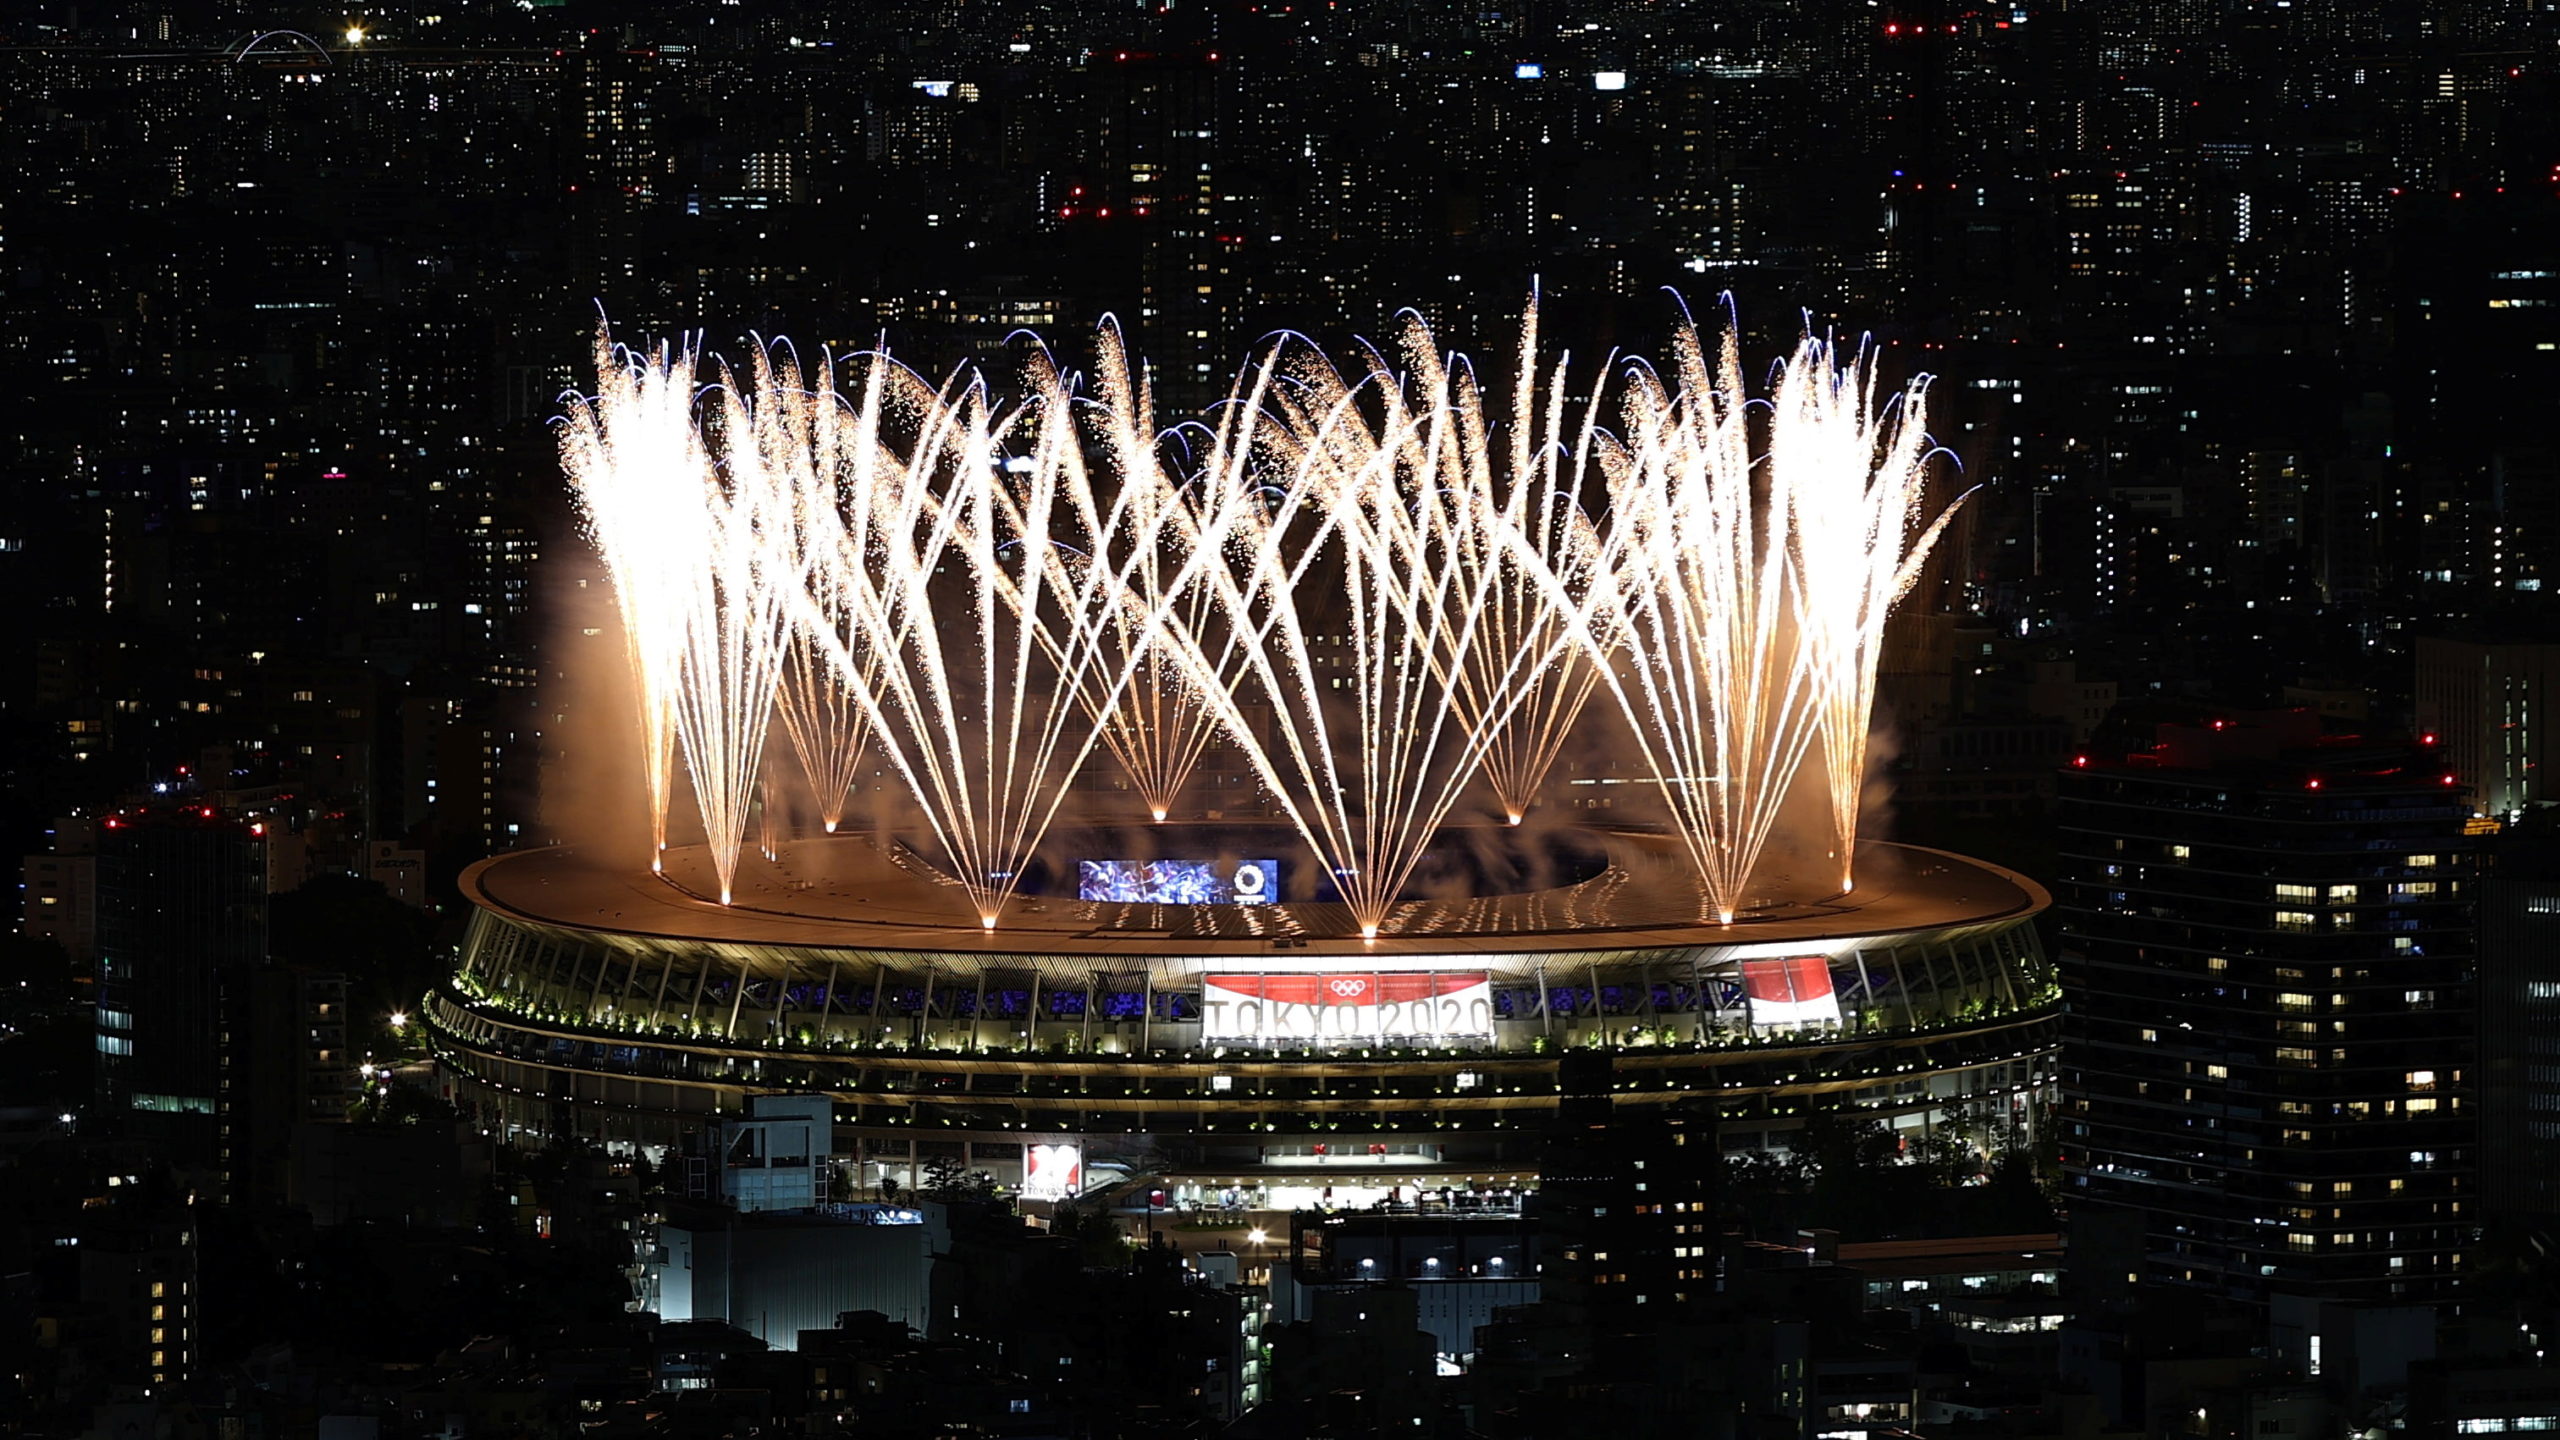 Tokyo 2020 Olympics - The Tokyo 2020 Olympics Opening Ceremony - Olympic Stadium, Tokyo, Japan - July 23, 2021. Fireworks during the opening ceremony are seen above the Olympic Stadium from the Shibuya Sky observation deck REUTERS/Kim Kyung-Hoon